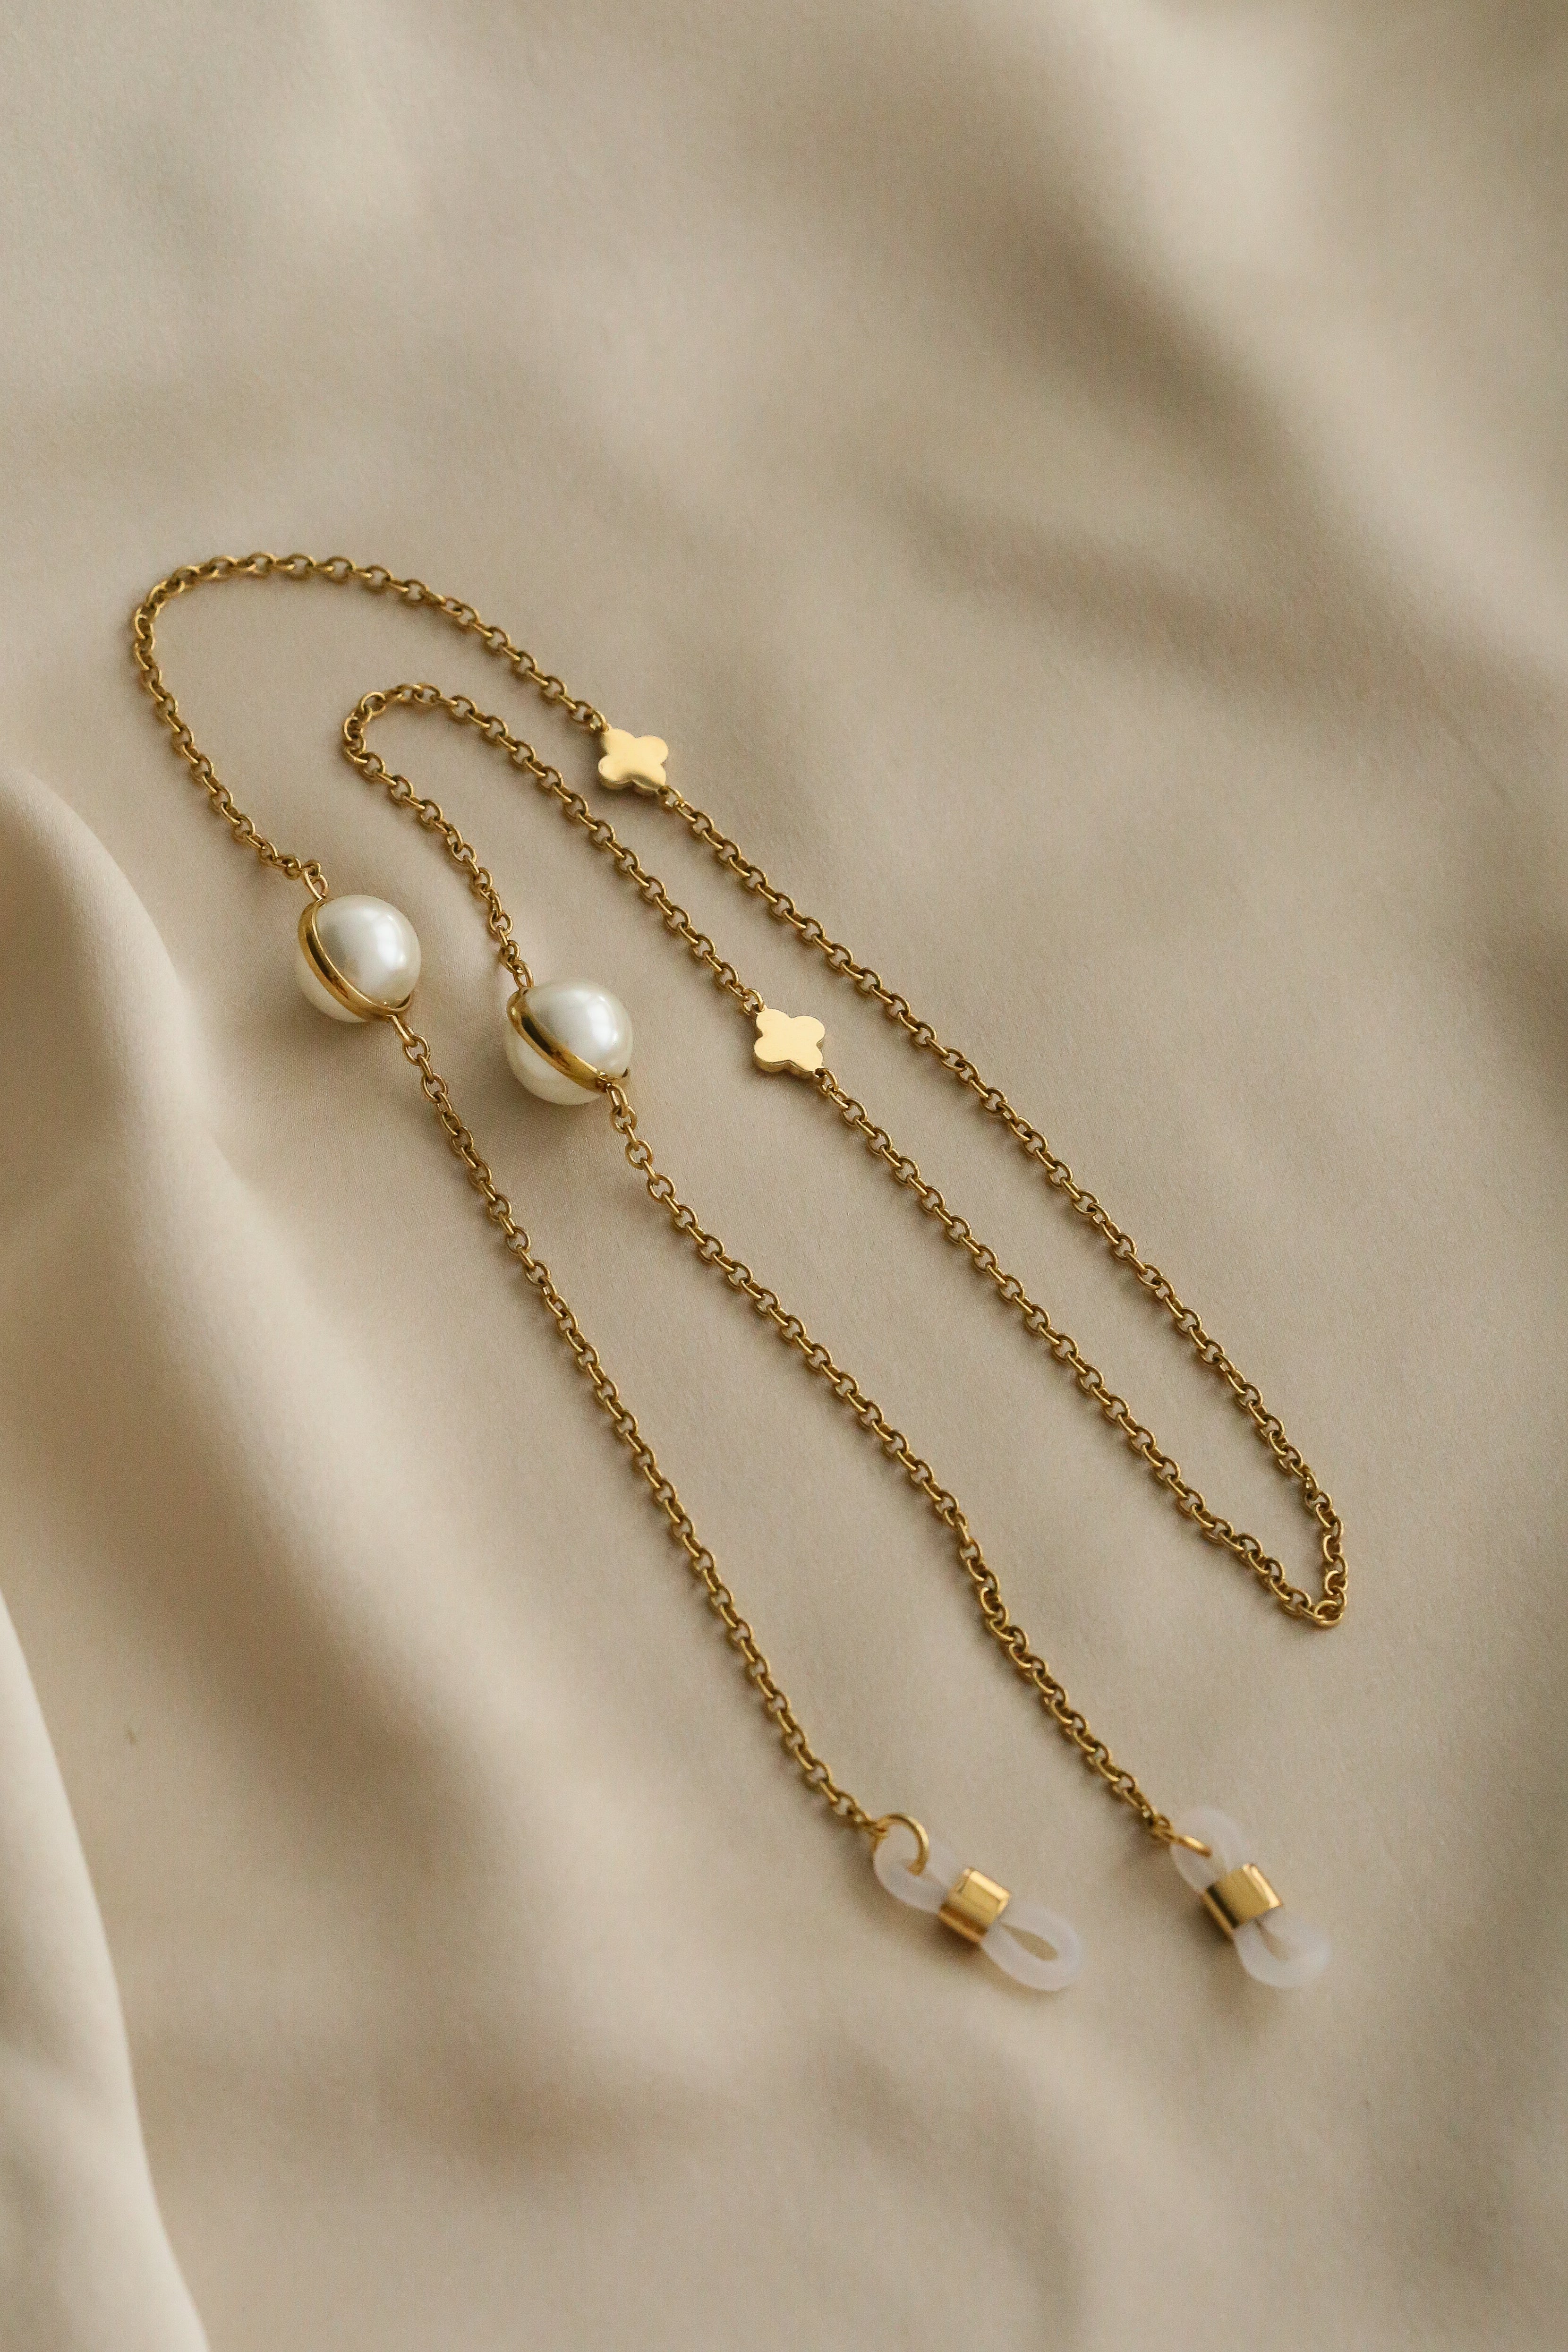 Tessa Sunglasses Chain - Boutique Minimaliste has waterproof, durable, elegant and vintage inspired jewelry